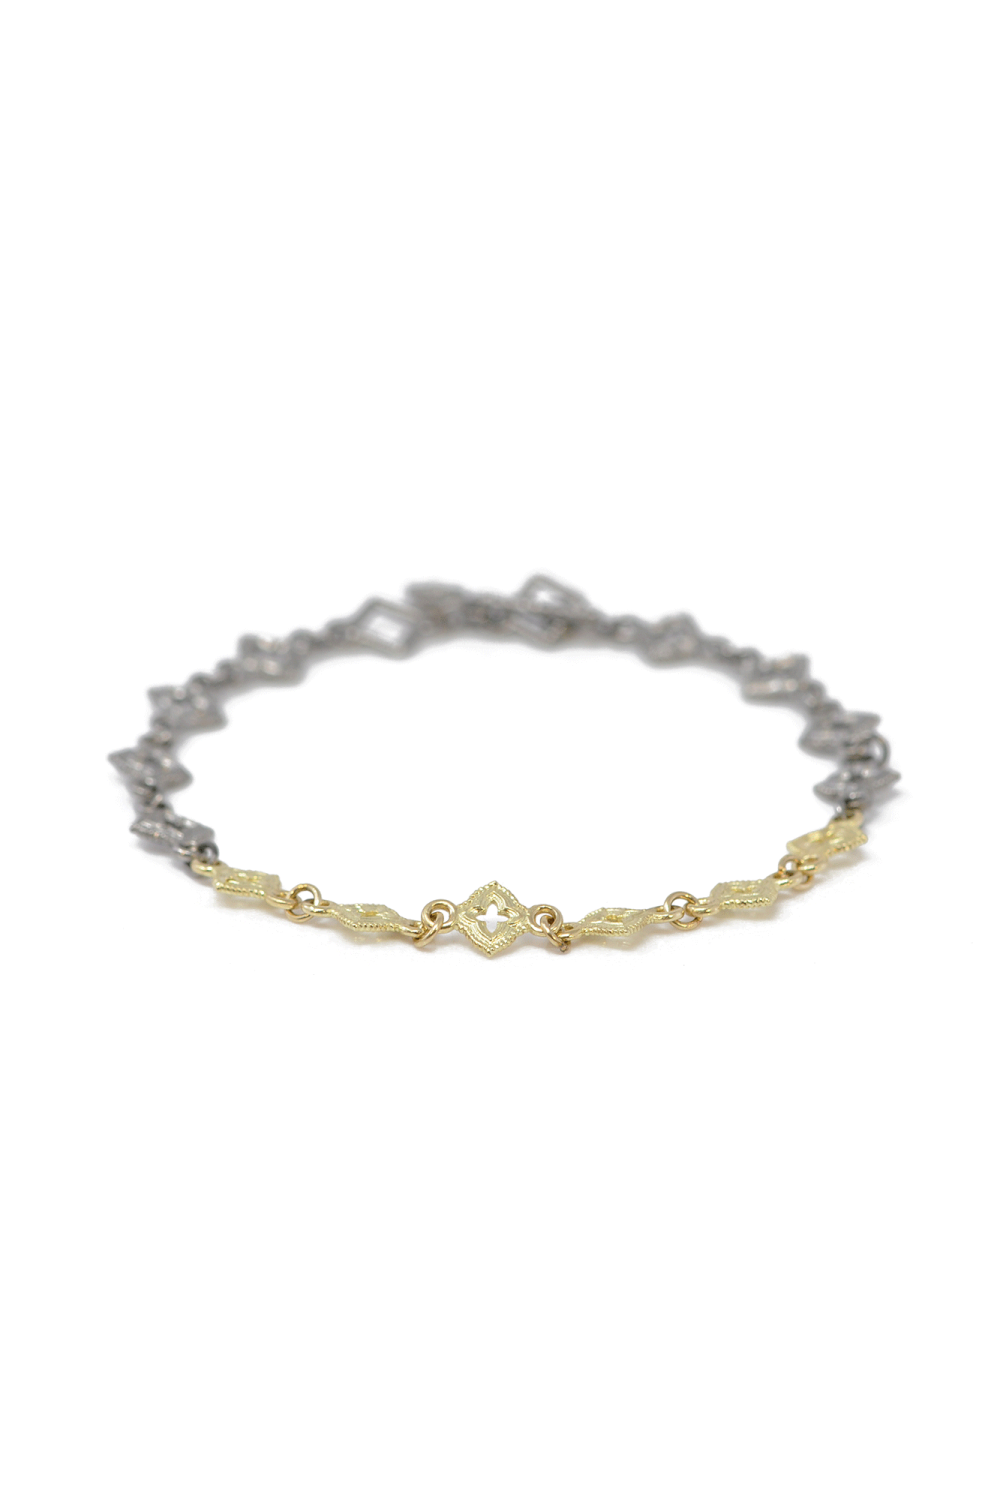 This elegant Scroll Bracelet from Armenta features a combination of 18kt yellow gold and grey sterling silver.